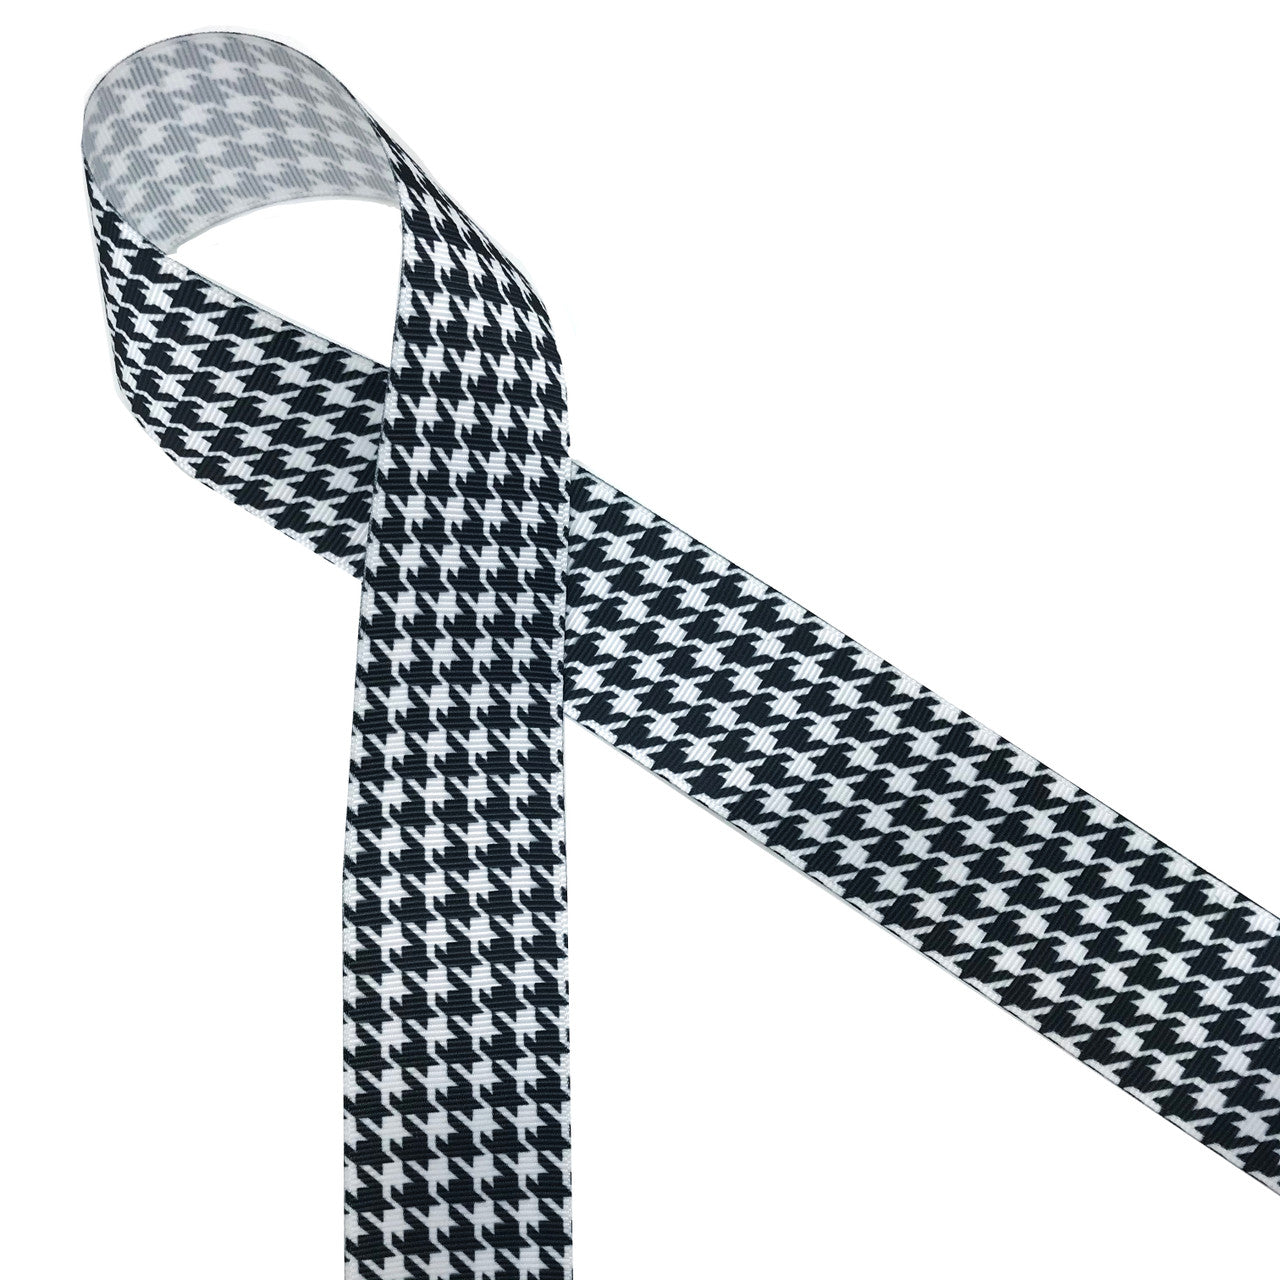 Black and white houndstooth check printed on 1.5" white grosgrain ribbon is a classic design for Holiday gift wrap, Father's day and Alabama football. All our ribbons are designed and printed in the USA